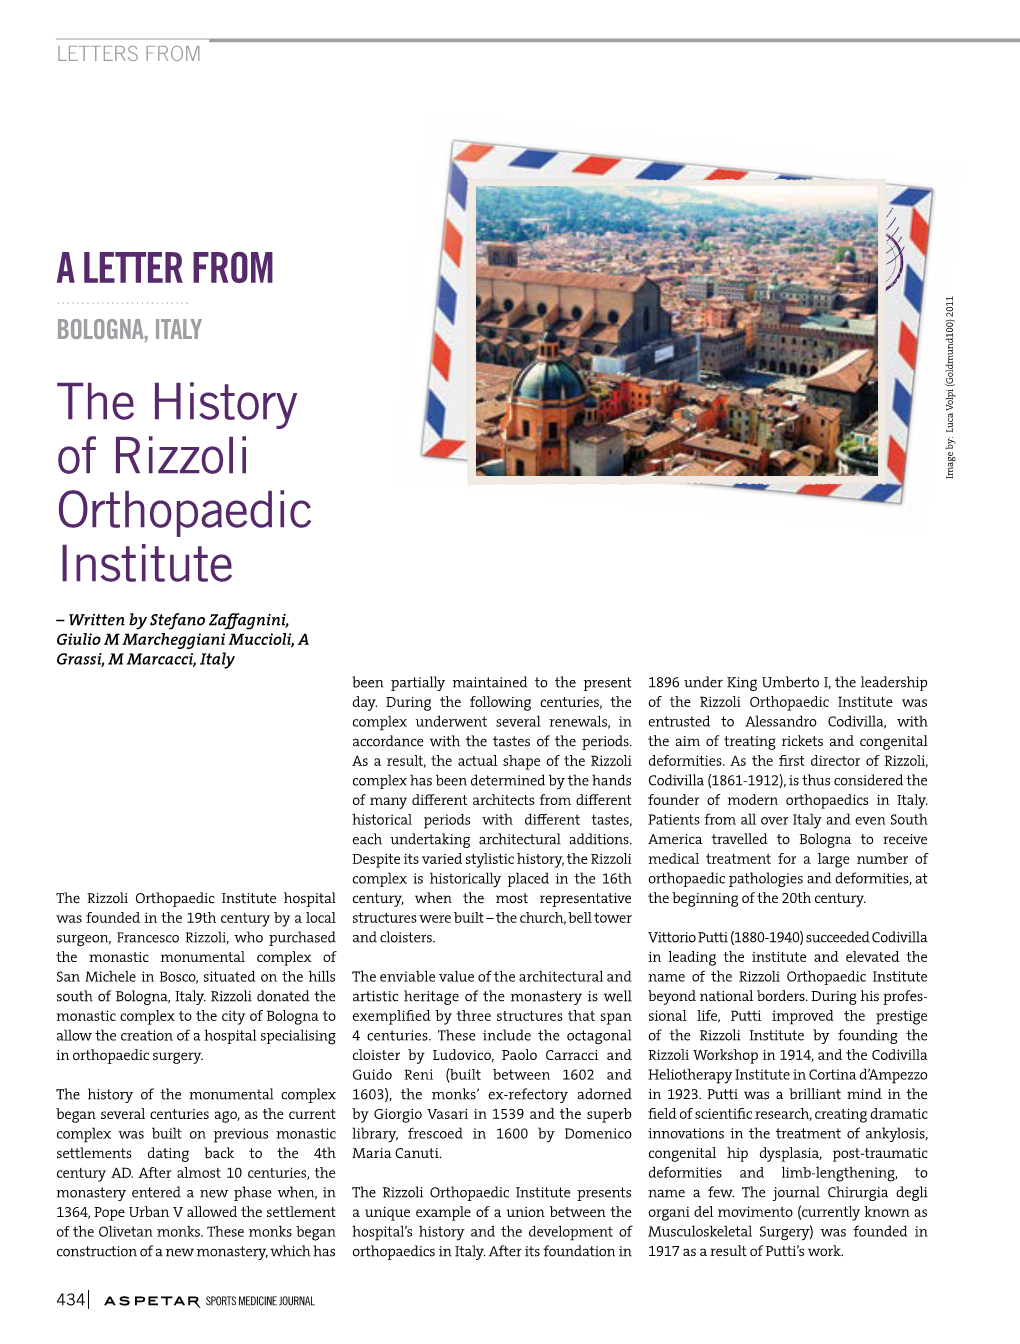 The History of Rizzoli Orthopaedic Institute